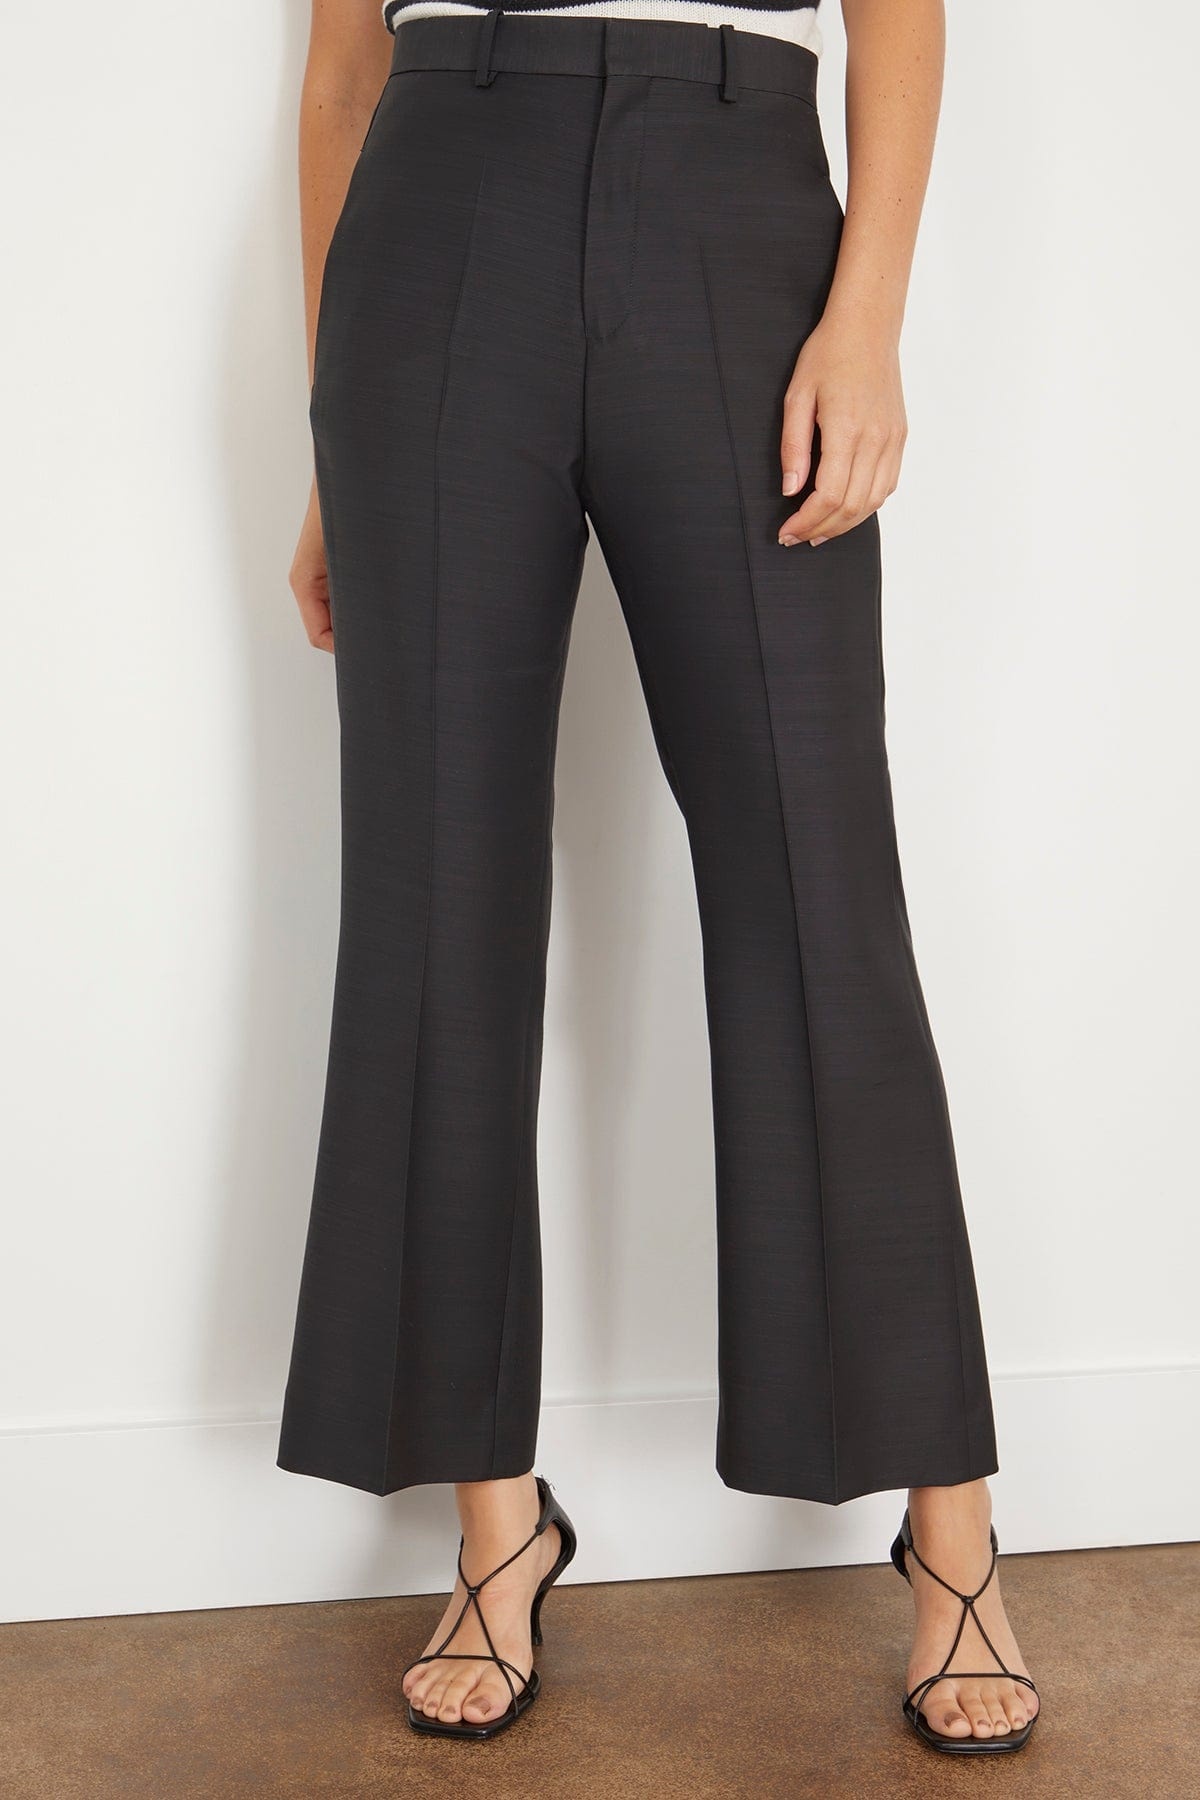 Credo Cropped Bootcut Woven Trouser in Black - 3